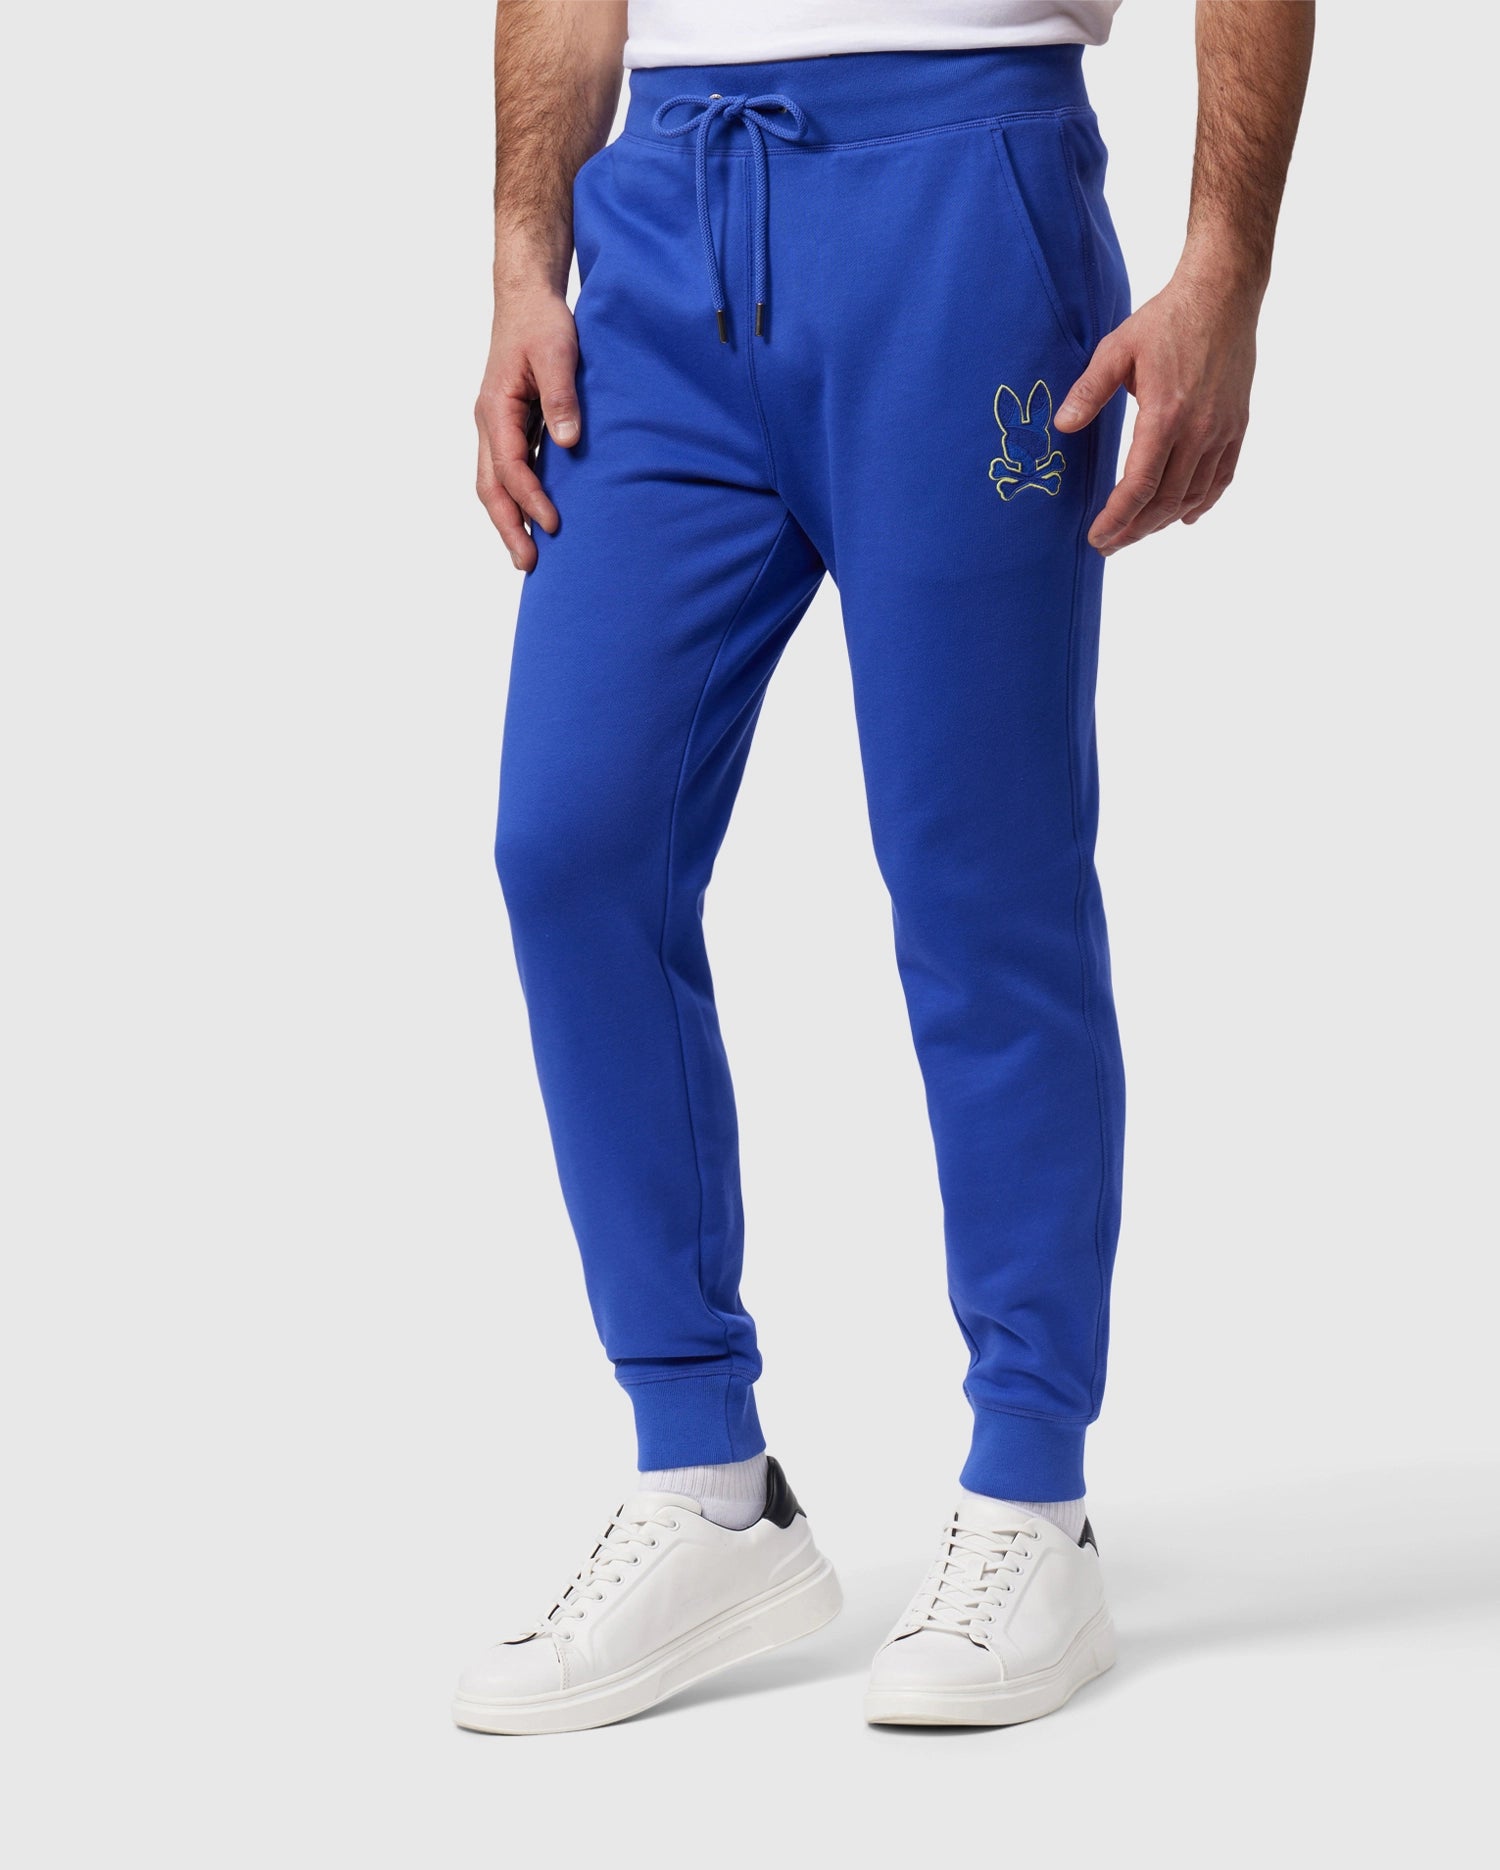 A person is wearing bright blue MENS LENOX REGULAR FIT SWEATPANT - B6P105B200 by Psycho Bunny made from cotton fleece, featuring an embroidered cartoon character on the upper left thigh. The pants have a drawstring waist and cuffs at the ankles. The person is also sporting white sneakers with black accents on the heel. The background is plain white.